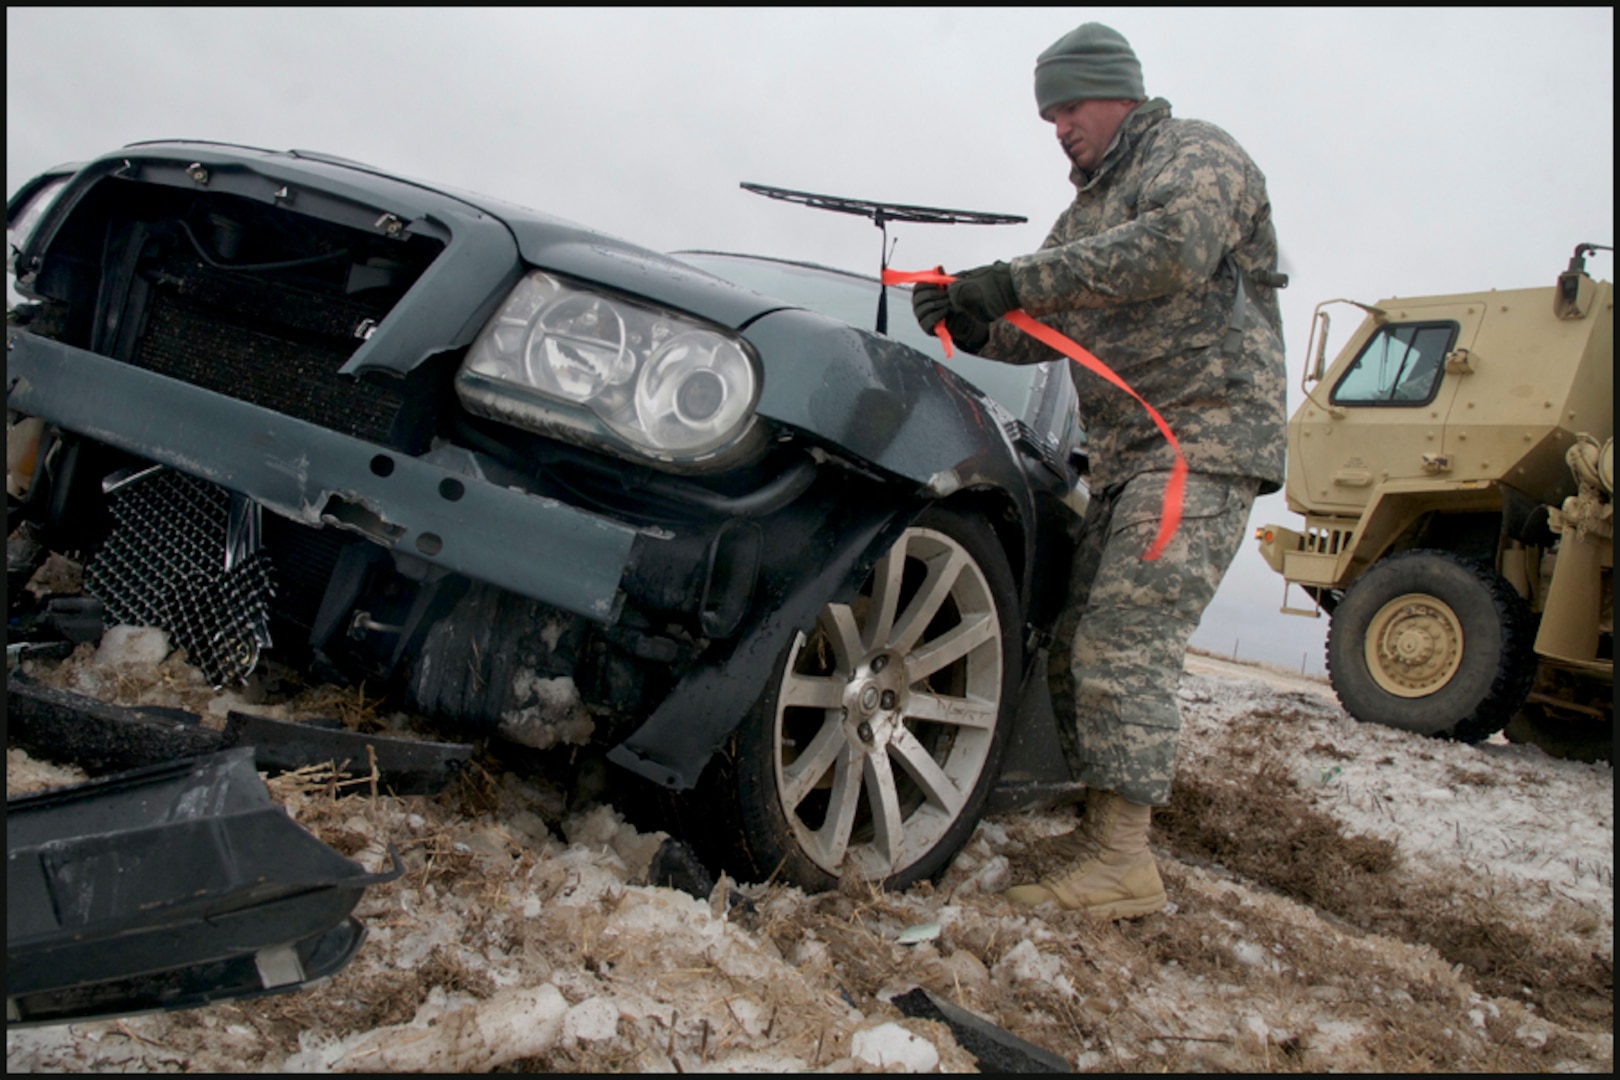 Sgt. Joseph English, of Newalla, Oklahoma, ties a fluorescent ribbon to a wrecked car, marking it as searched and clear of passengers while he and other Soldiers patrolled a section of Interstate 35 north of Perry, Okla., Dec. 28, 2015.

English, a military policeman with the 45th Brigade Special Troops Battalion, 45th Infantry Brigade Combat Team, and other Soldiers from the Brigade assisted the Oklahoma Highway Patrol with motorist assistance during a severe winter storm on Dec. 27 and 28. (Oklahoma National Guard photo by Sgt. Anthony Jones)